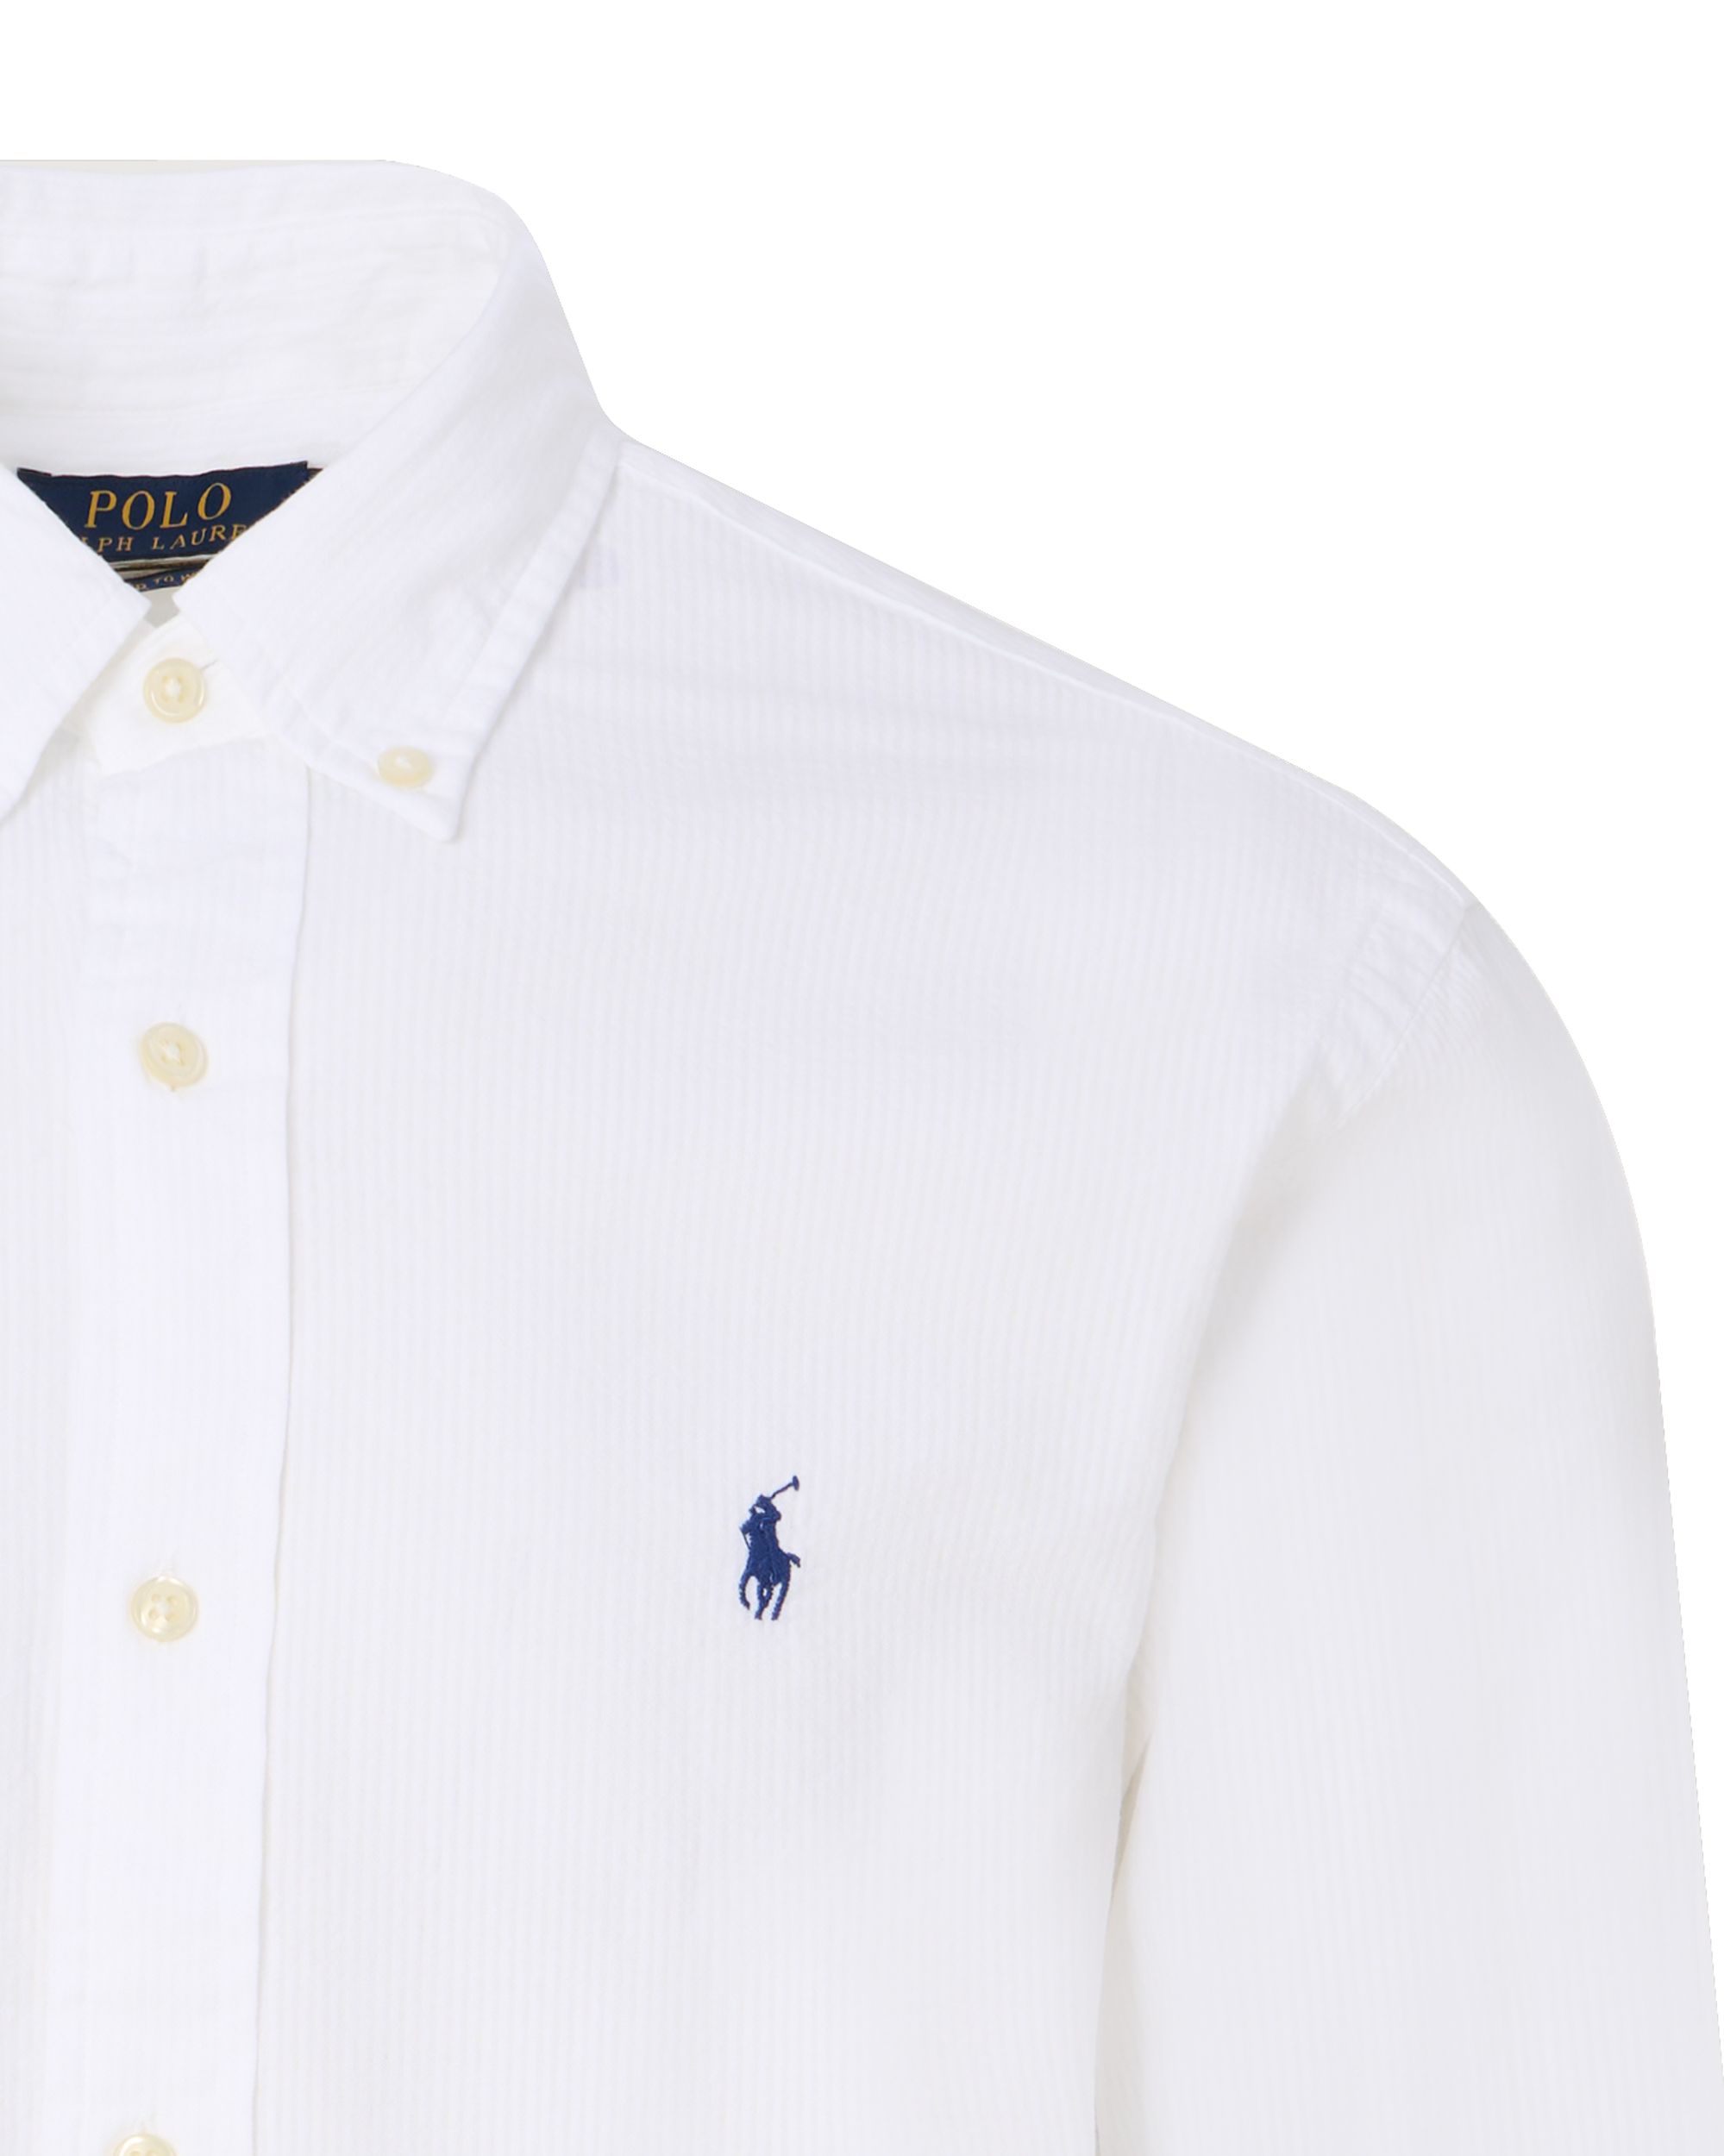 Polo Ralph Lauren Casual Overhemd LM Wit 095275-001-L